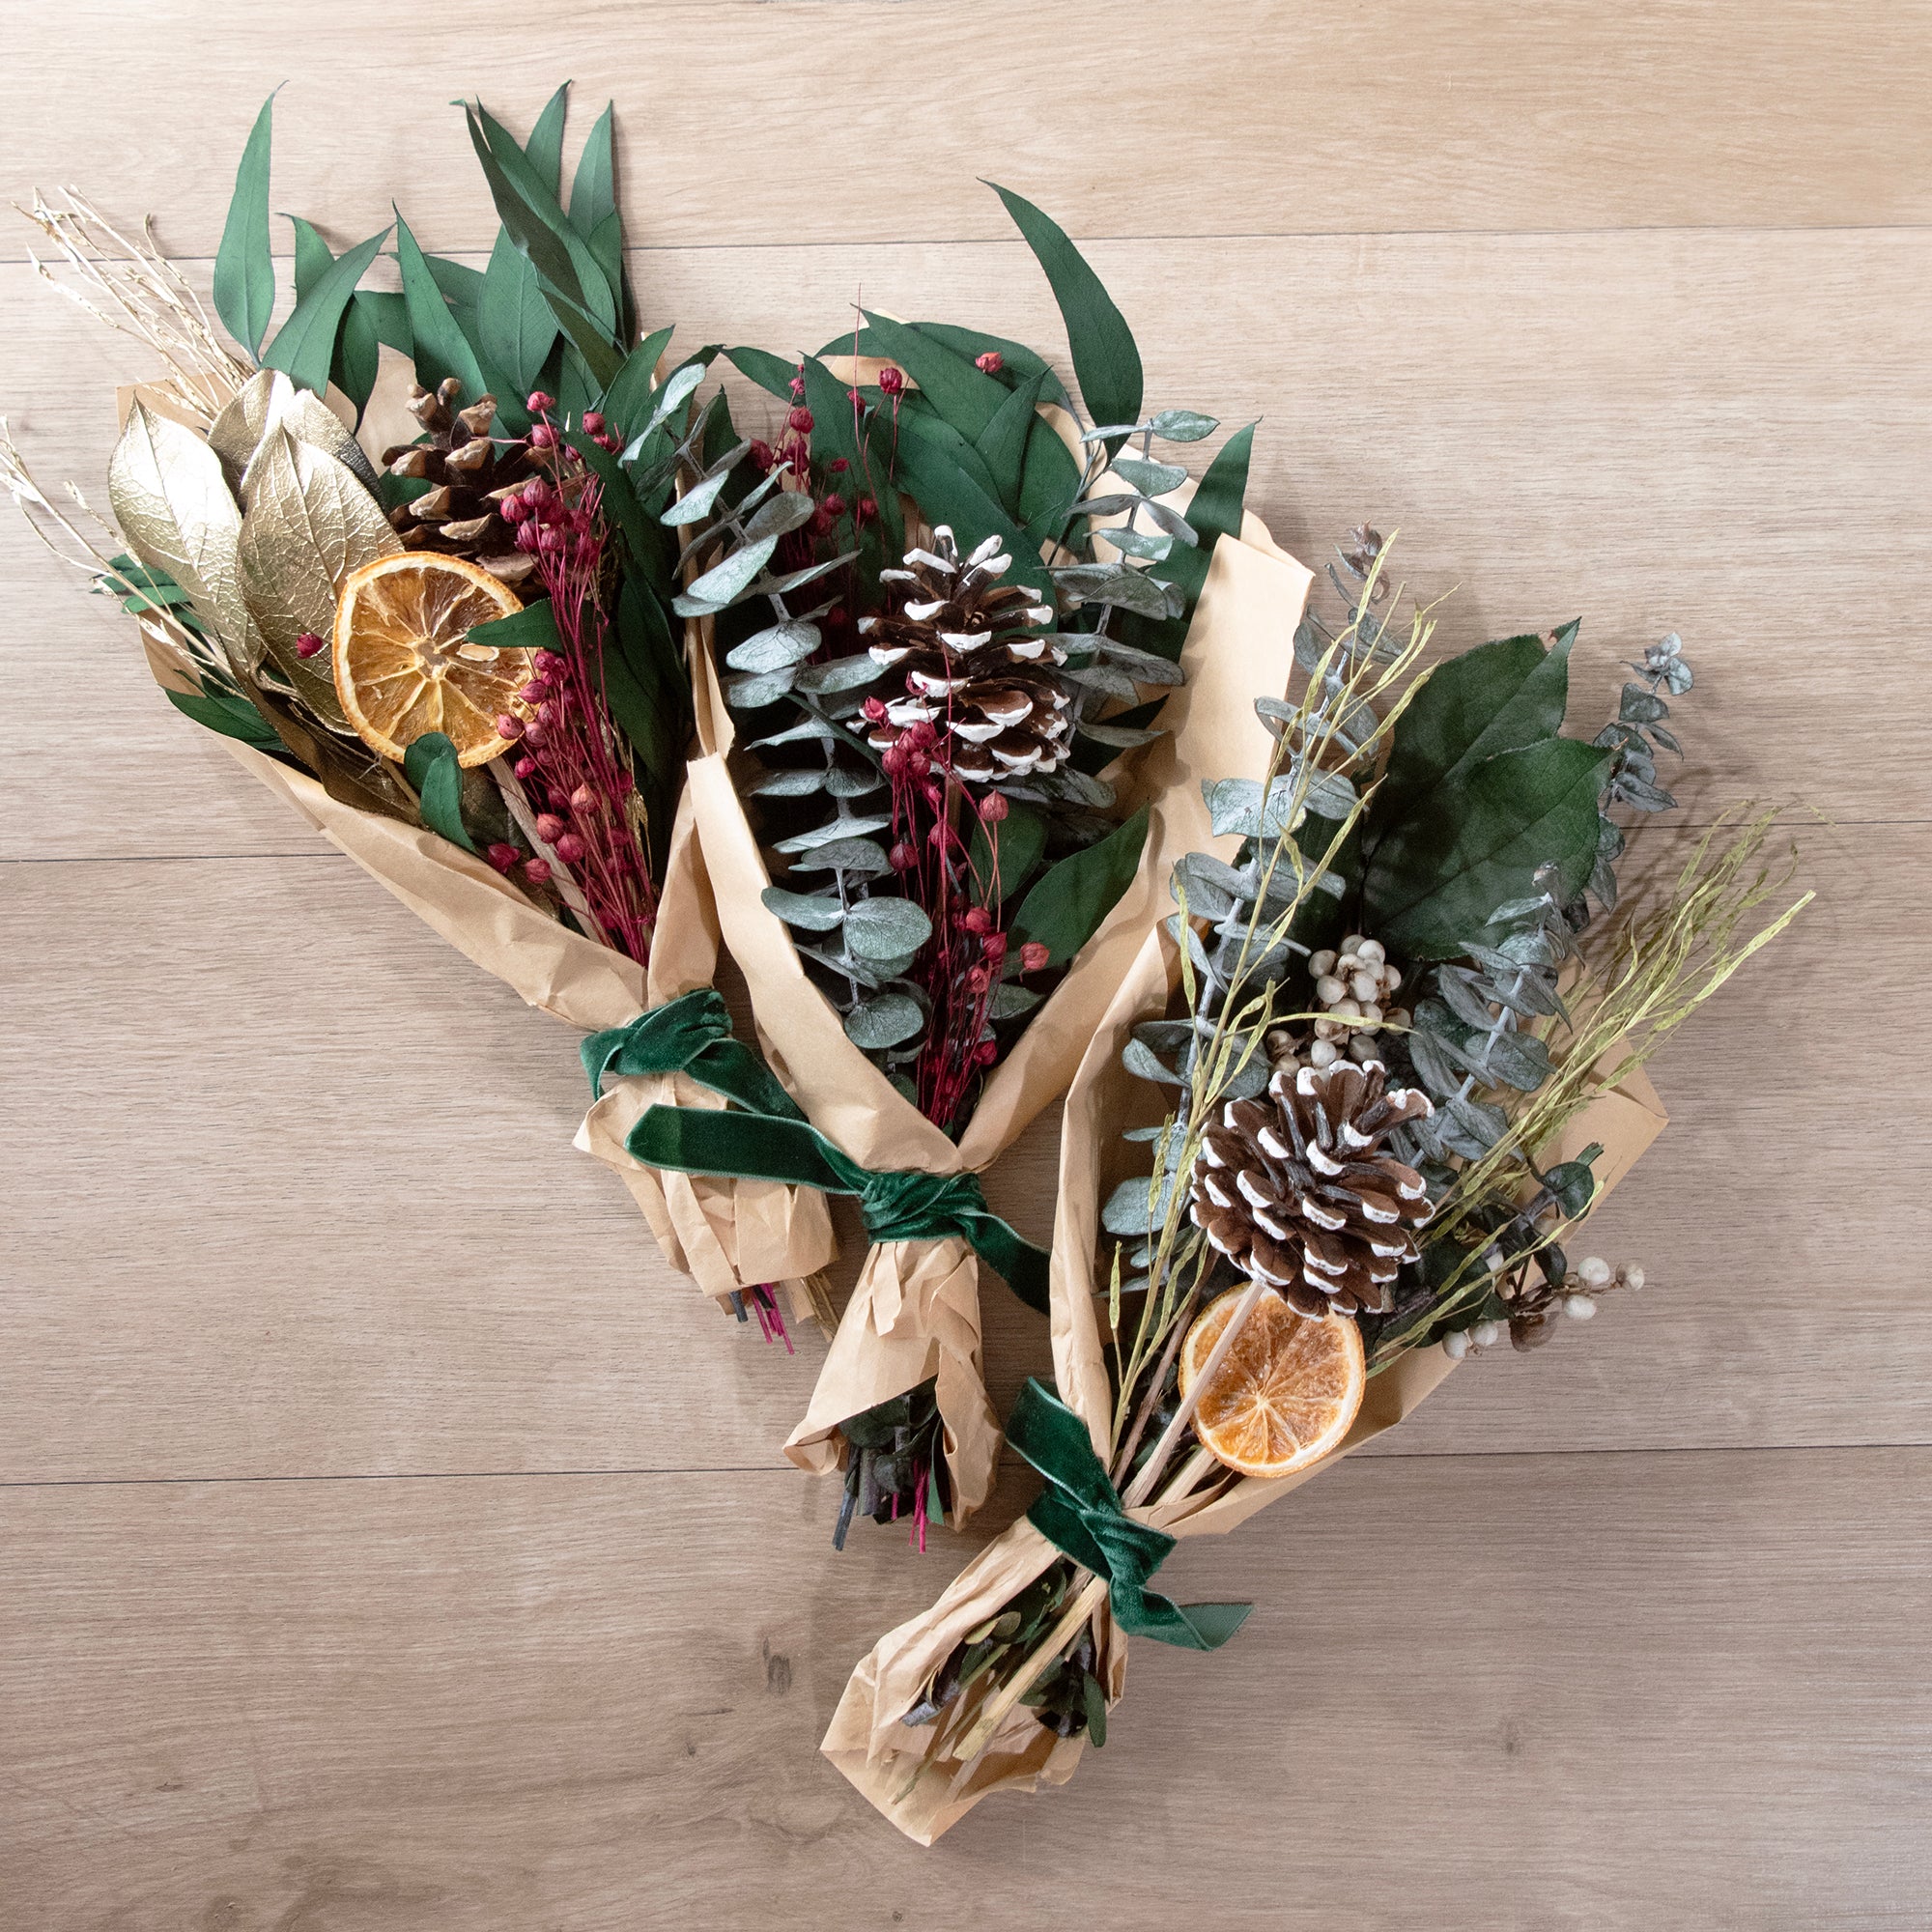 Petite Winter 12" Bouquet: Gold Leaf & Willow Eucalyptus collection